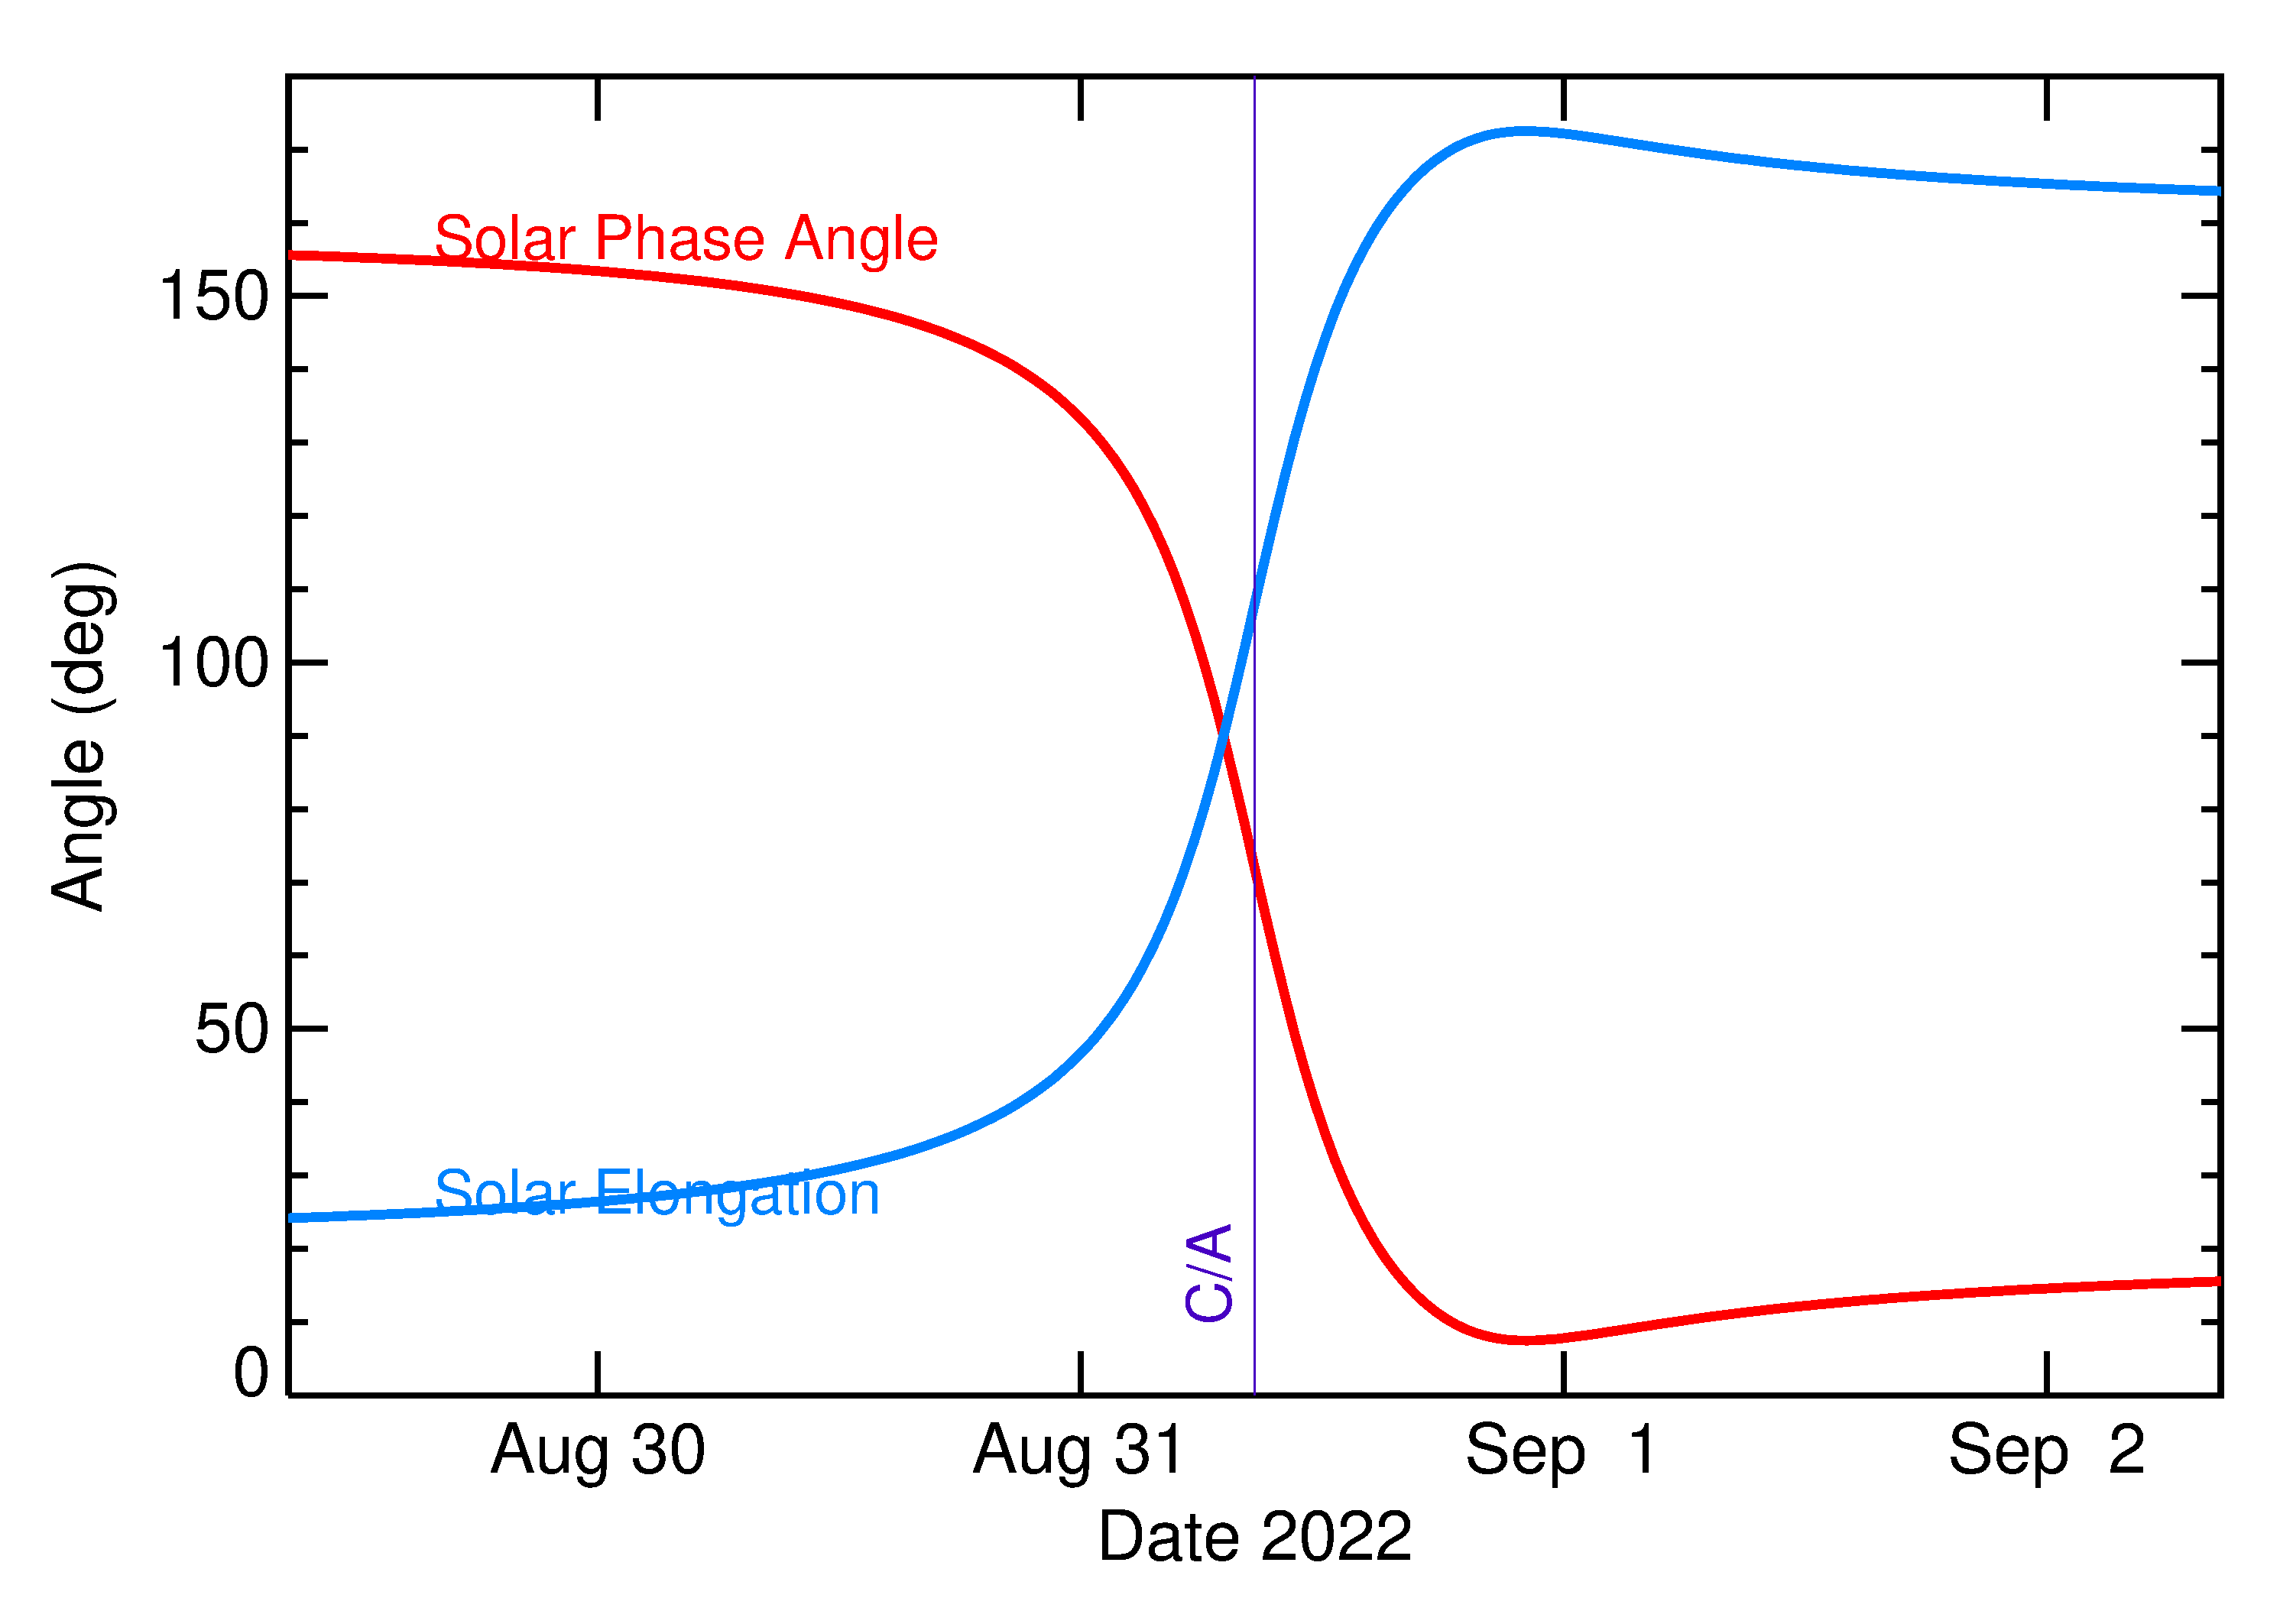 Solar Elongation and Solar Phase Angle of 2022 RL in the days around closest approach